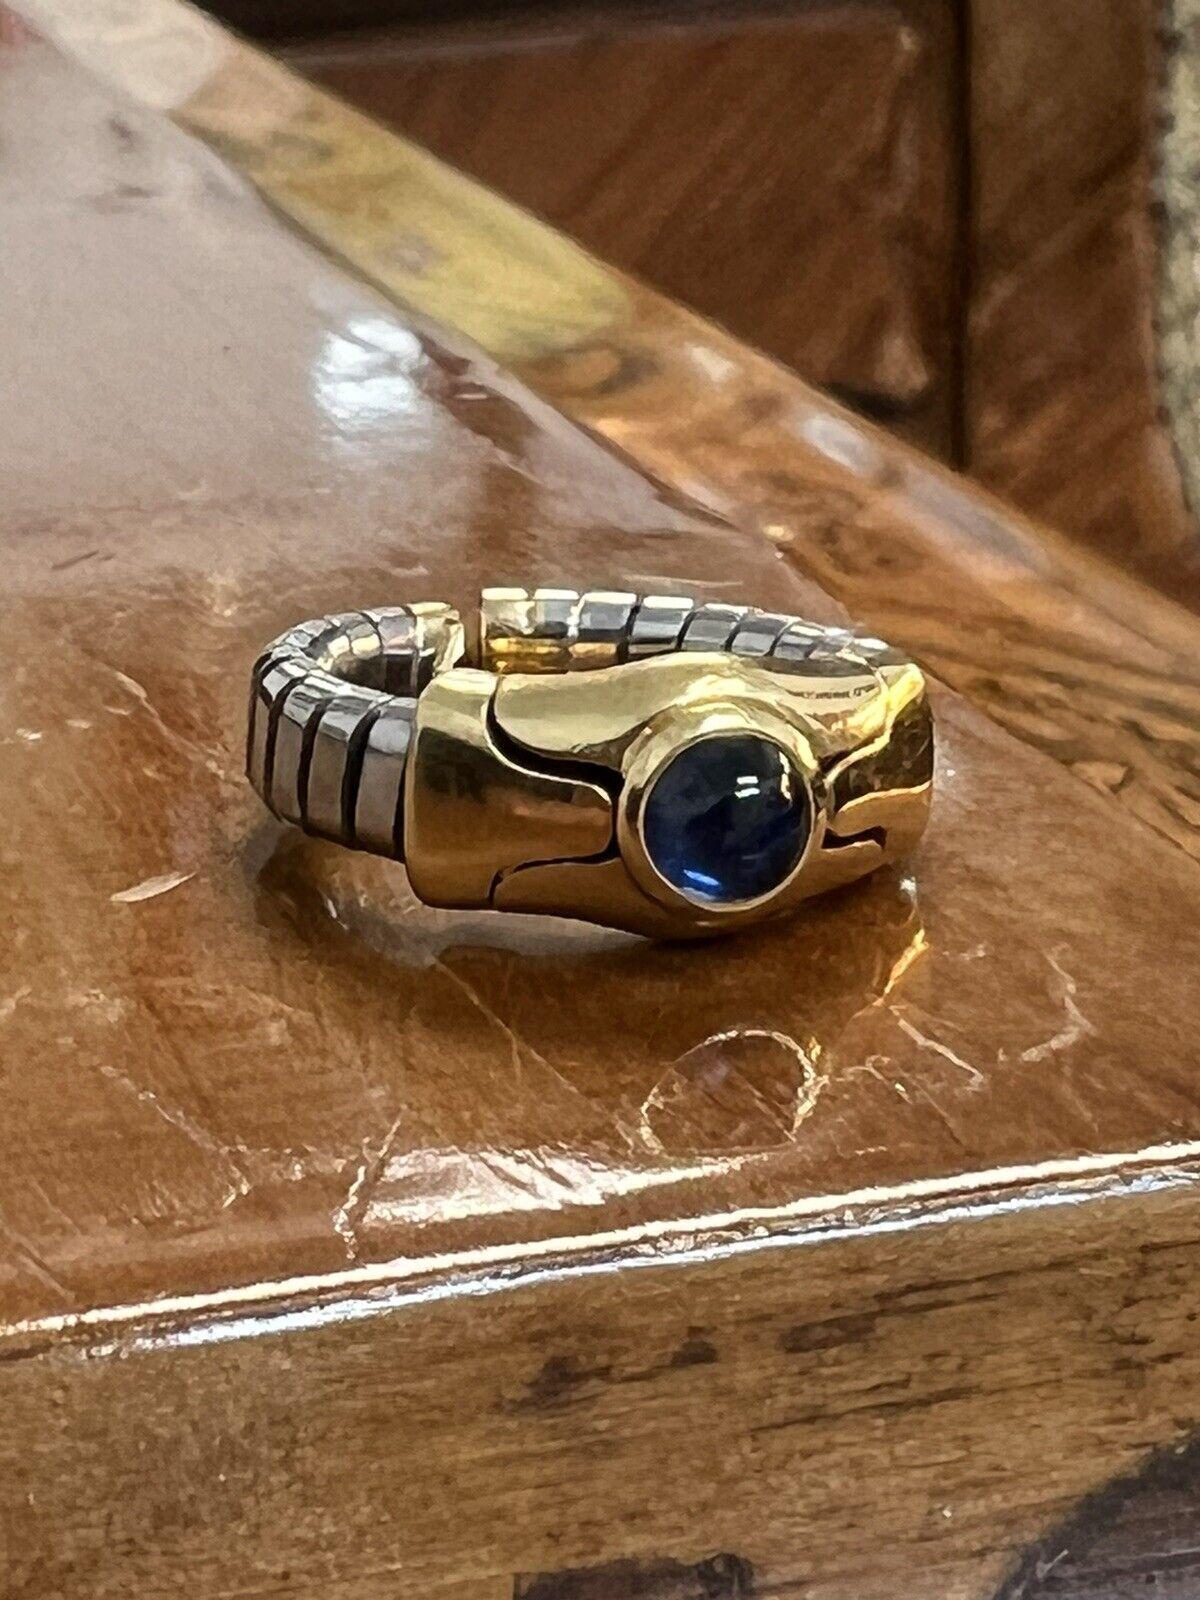 Bvlgari Italy 18k Yellow Gold, Cabochon Sapphire & Stainless Steel Tubogas Ring Vintage

Here is your chance to purchase a beautiful and highly collectible designer ring.  Truly a great piece at a great price! 

Weight: 7.7 grams

Condition: Great